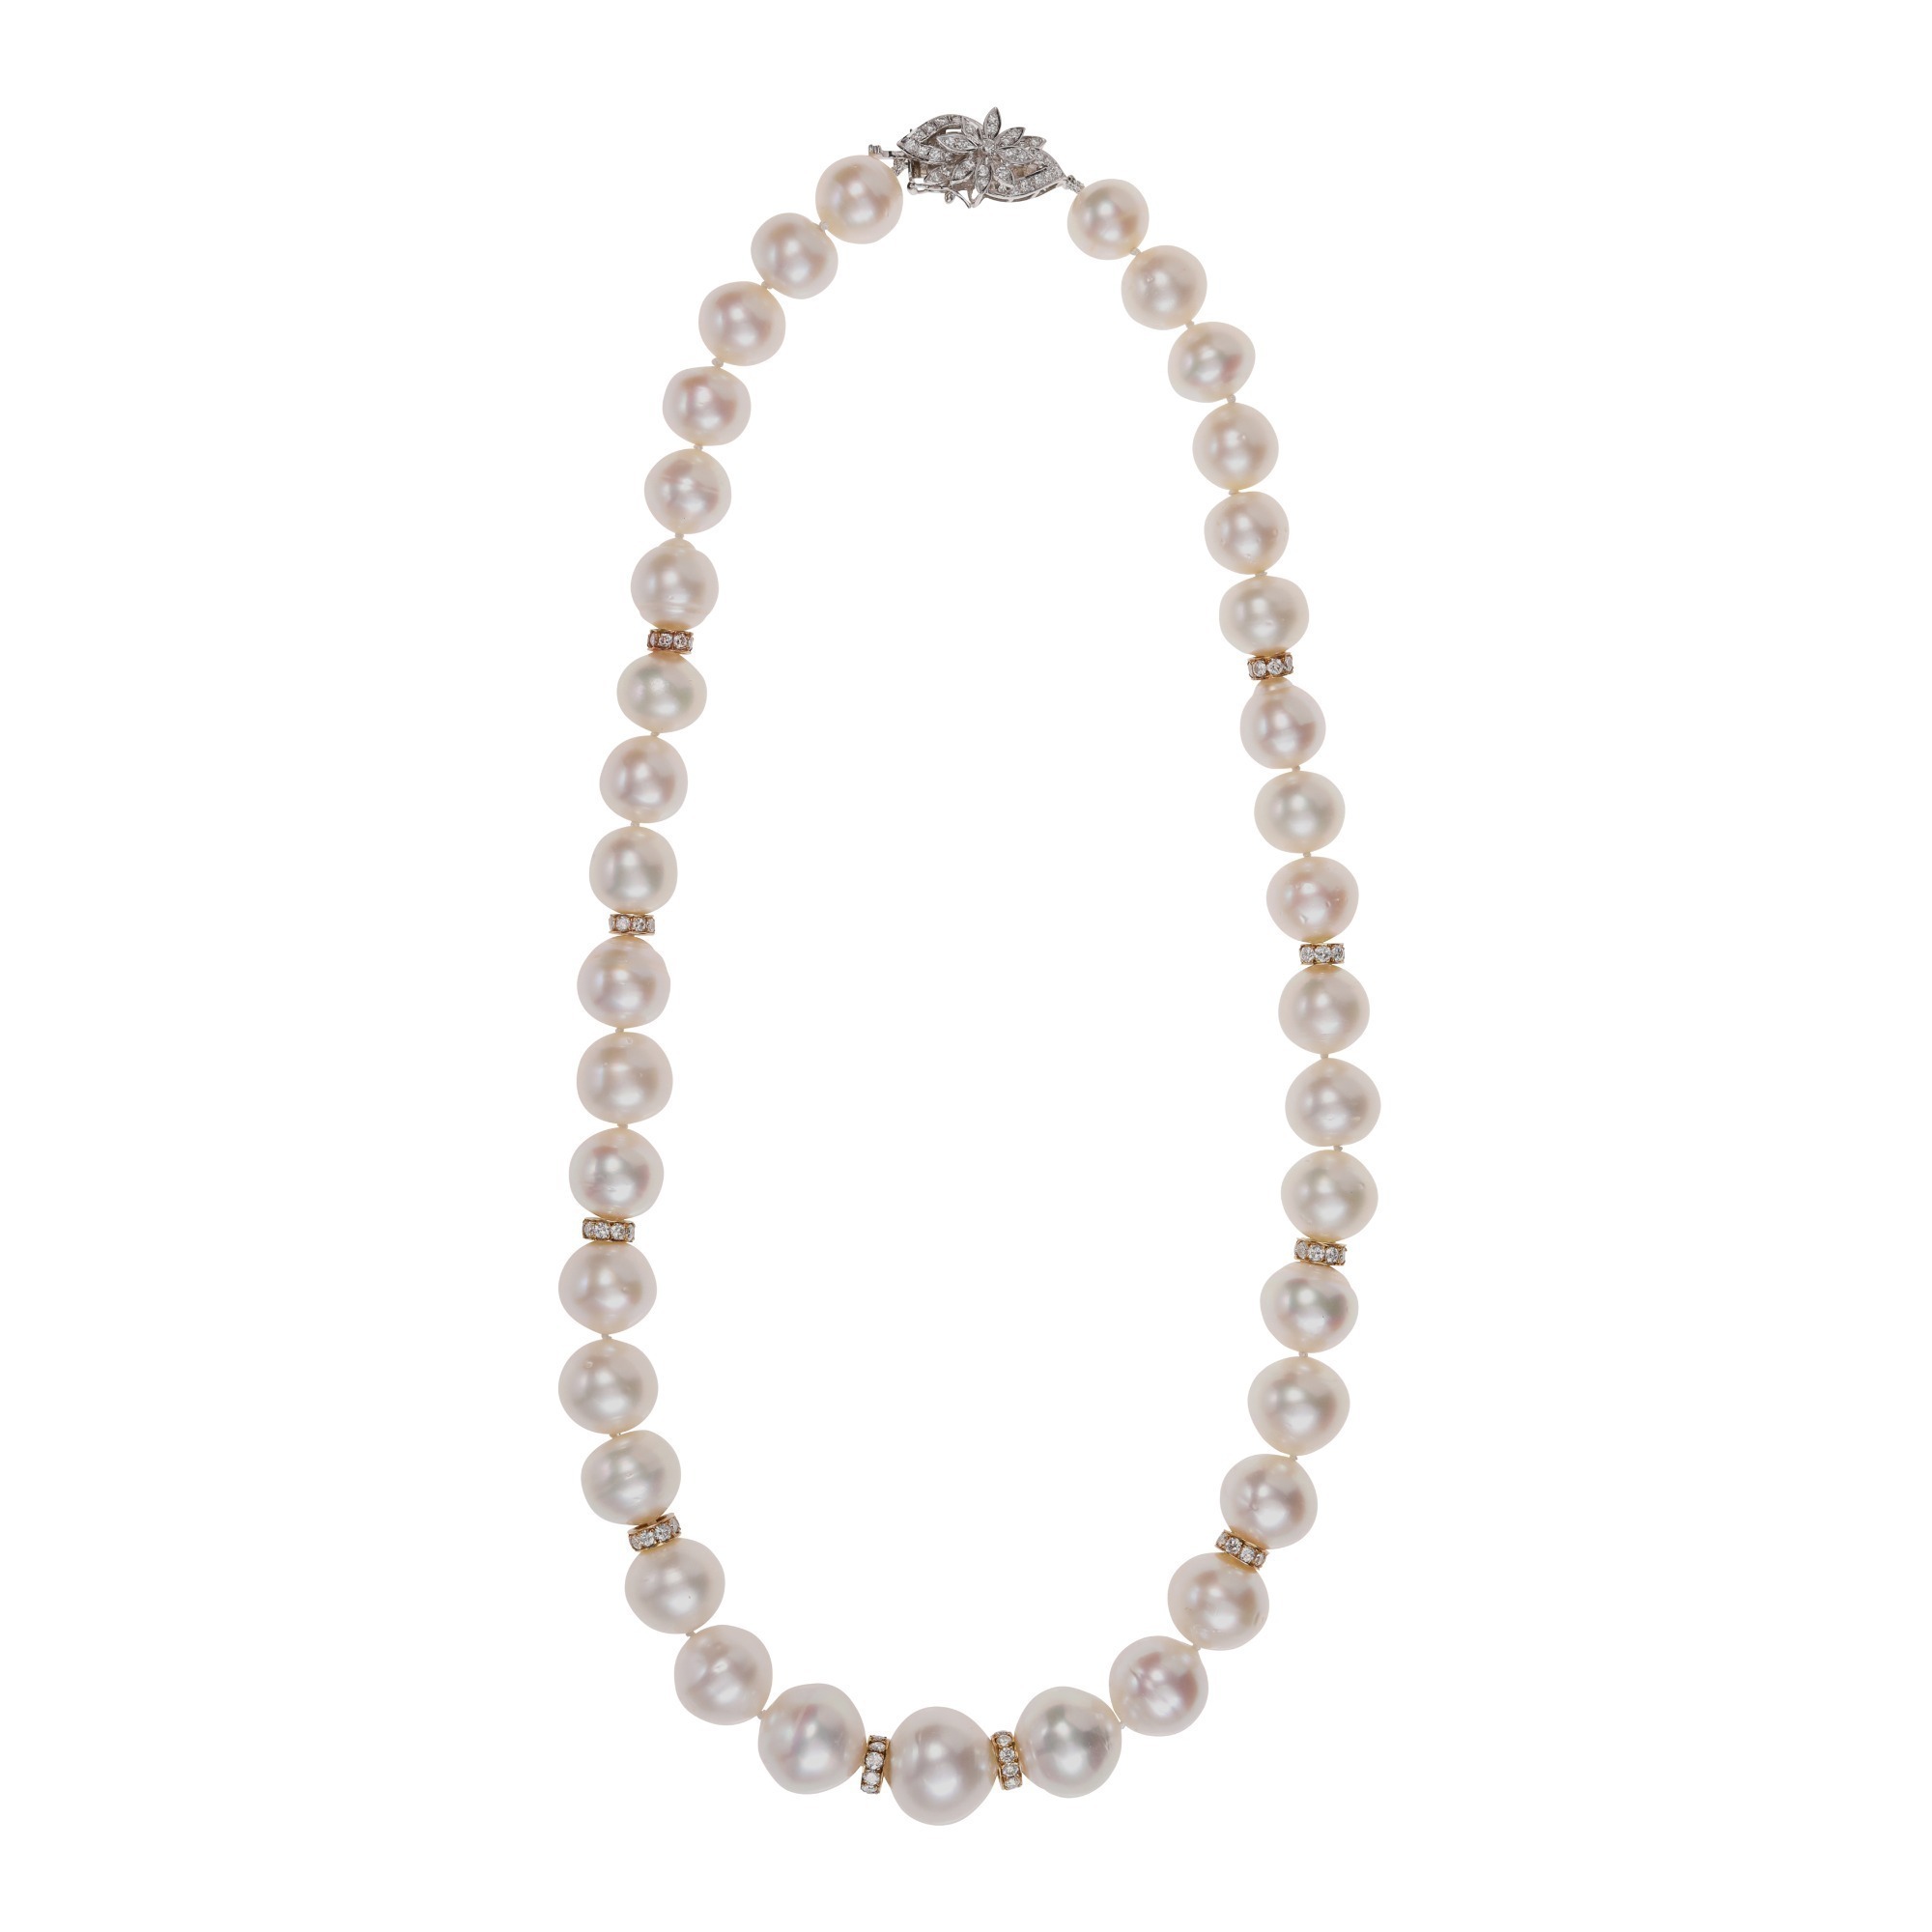 A South Sea Cultured Graduated Pearl, 18K Gold and Diamond Necklace with 11.5mm to 15.5mm Pearls